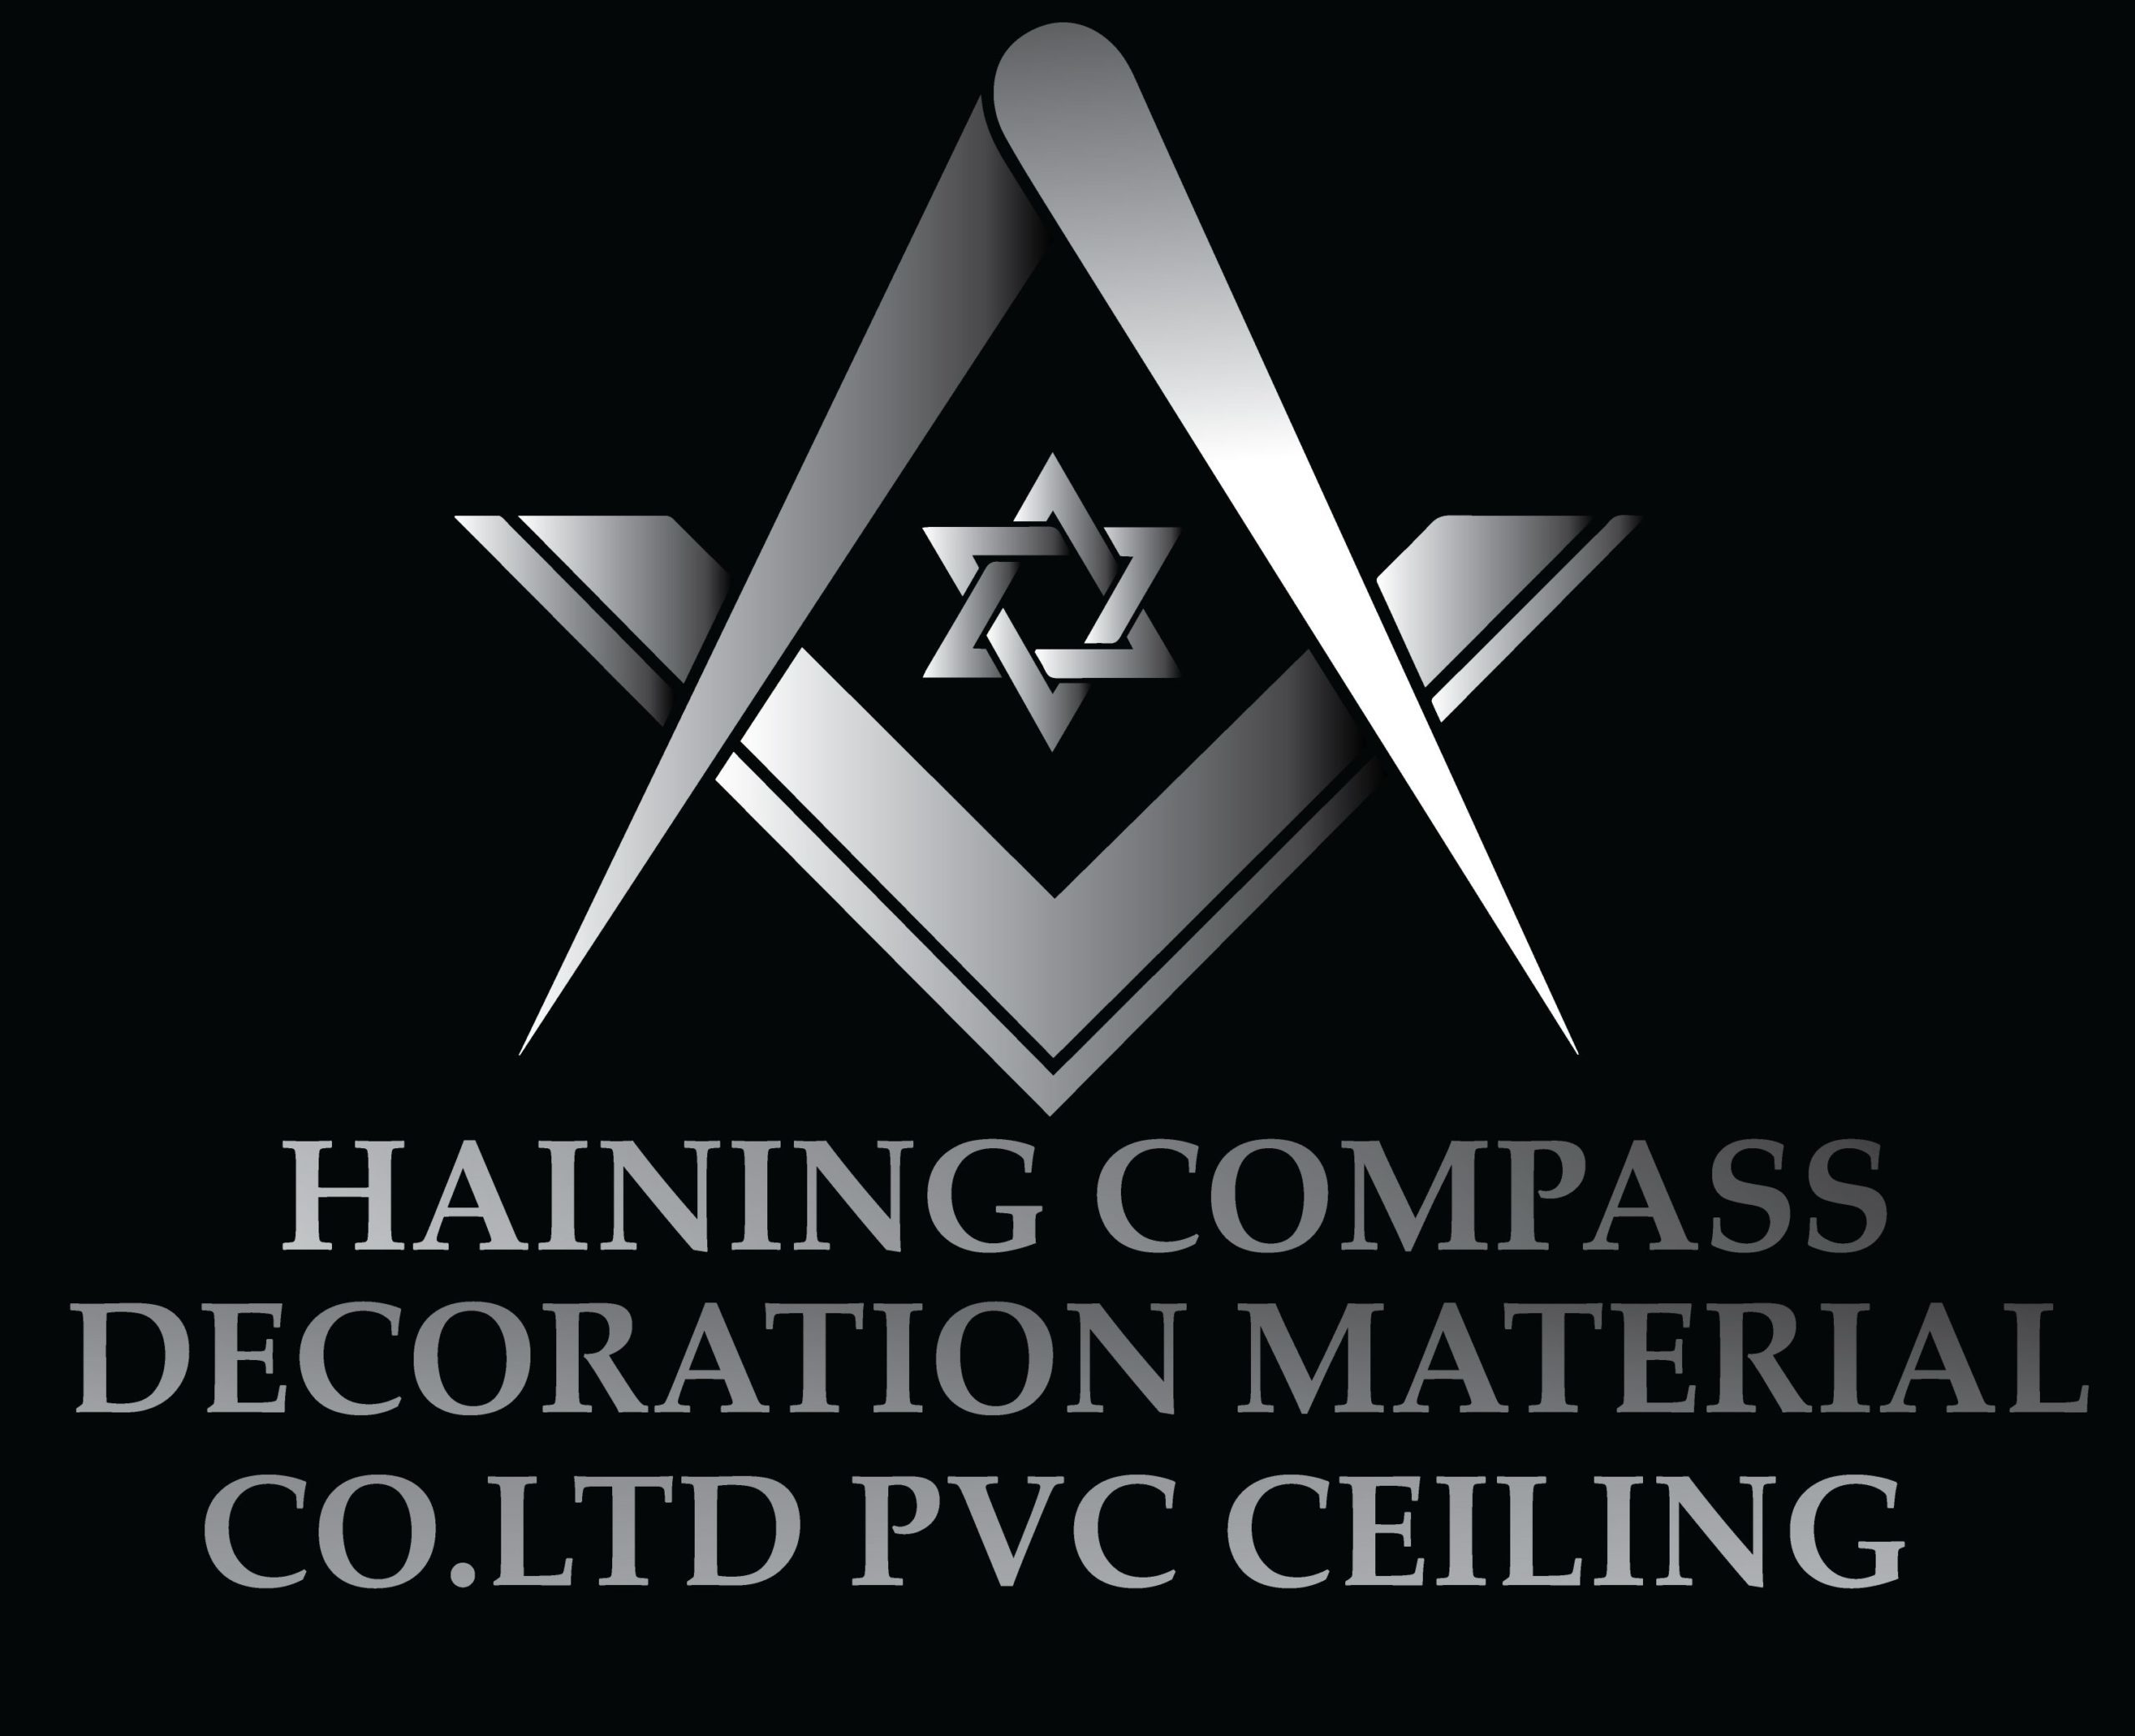 Haining Compass Decoration Material Co Limited